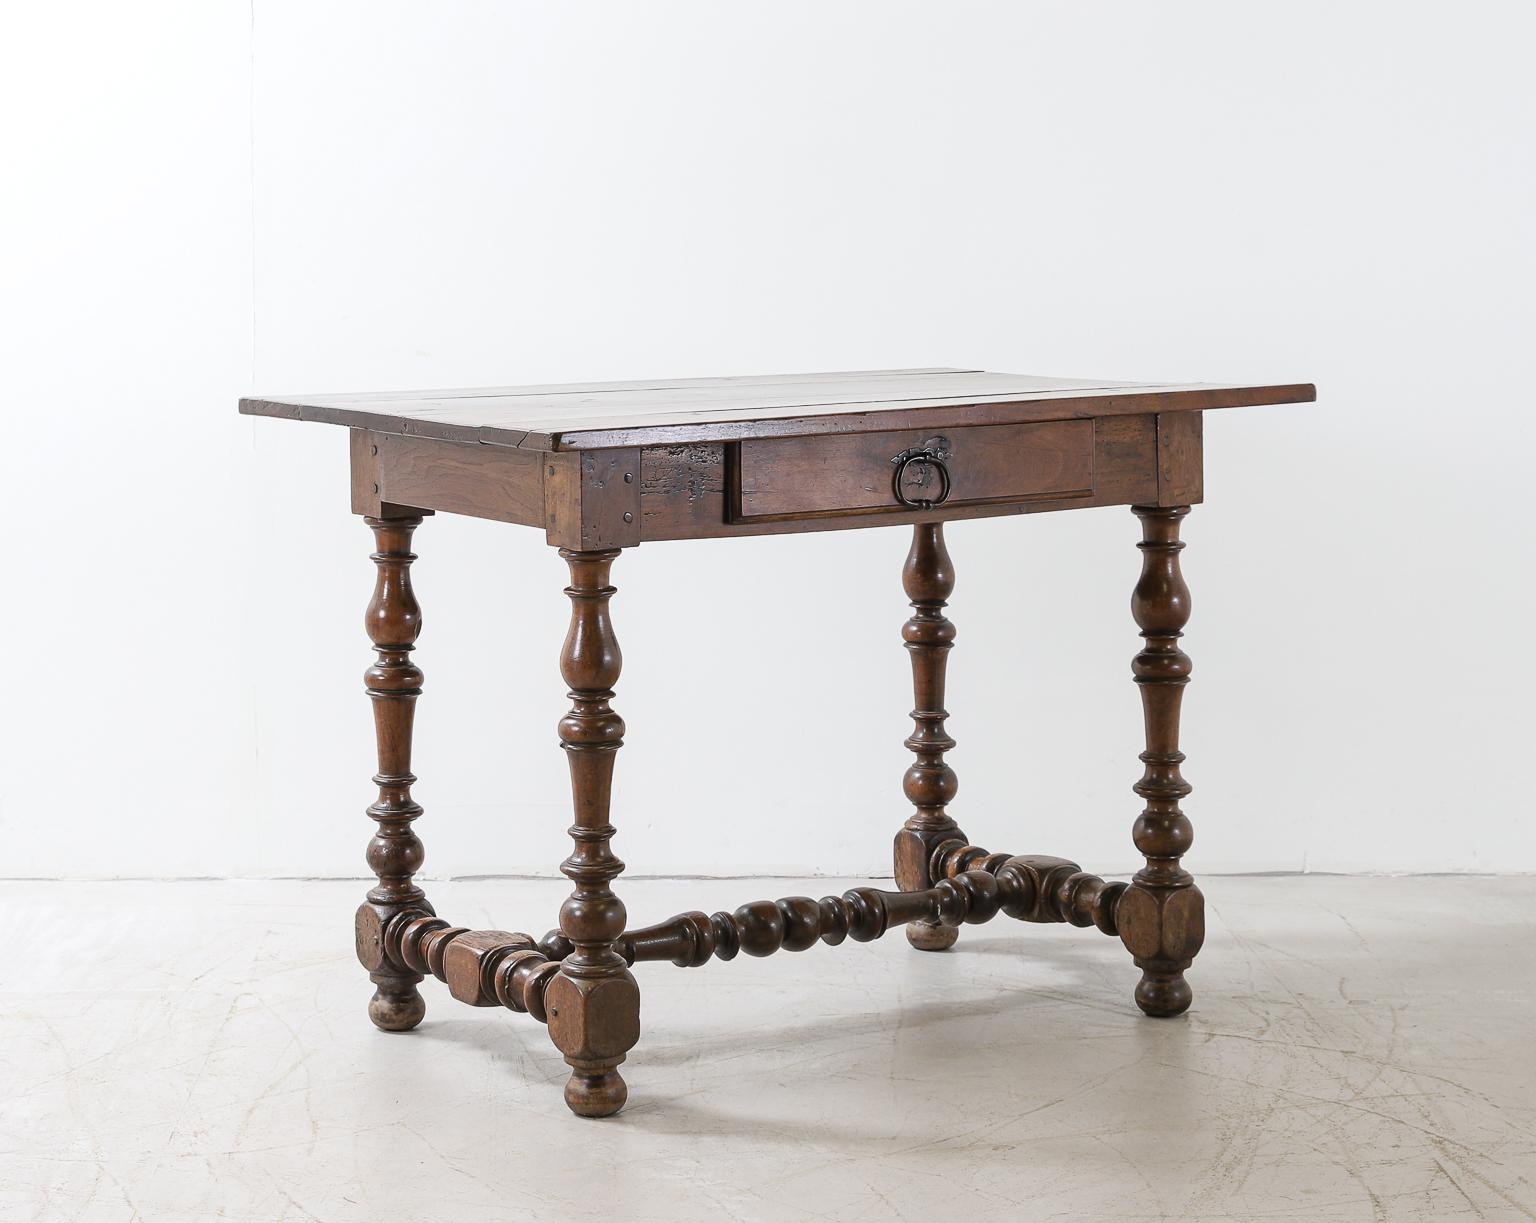 Early 18th Century Oak Single Drawer Table with Turned Legs In Good Condition For Sale In London, Charterhouse Square